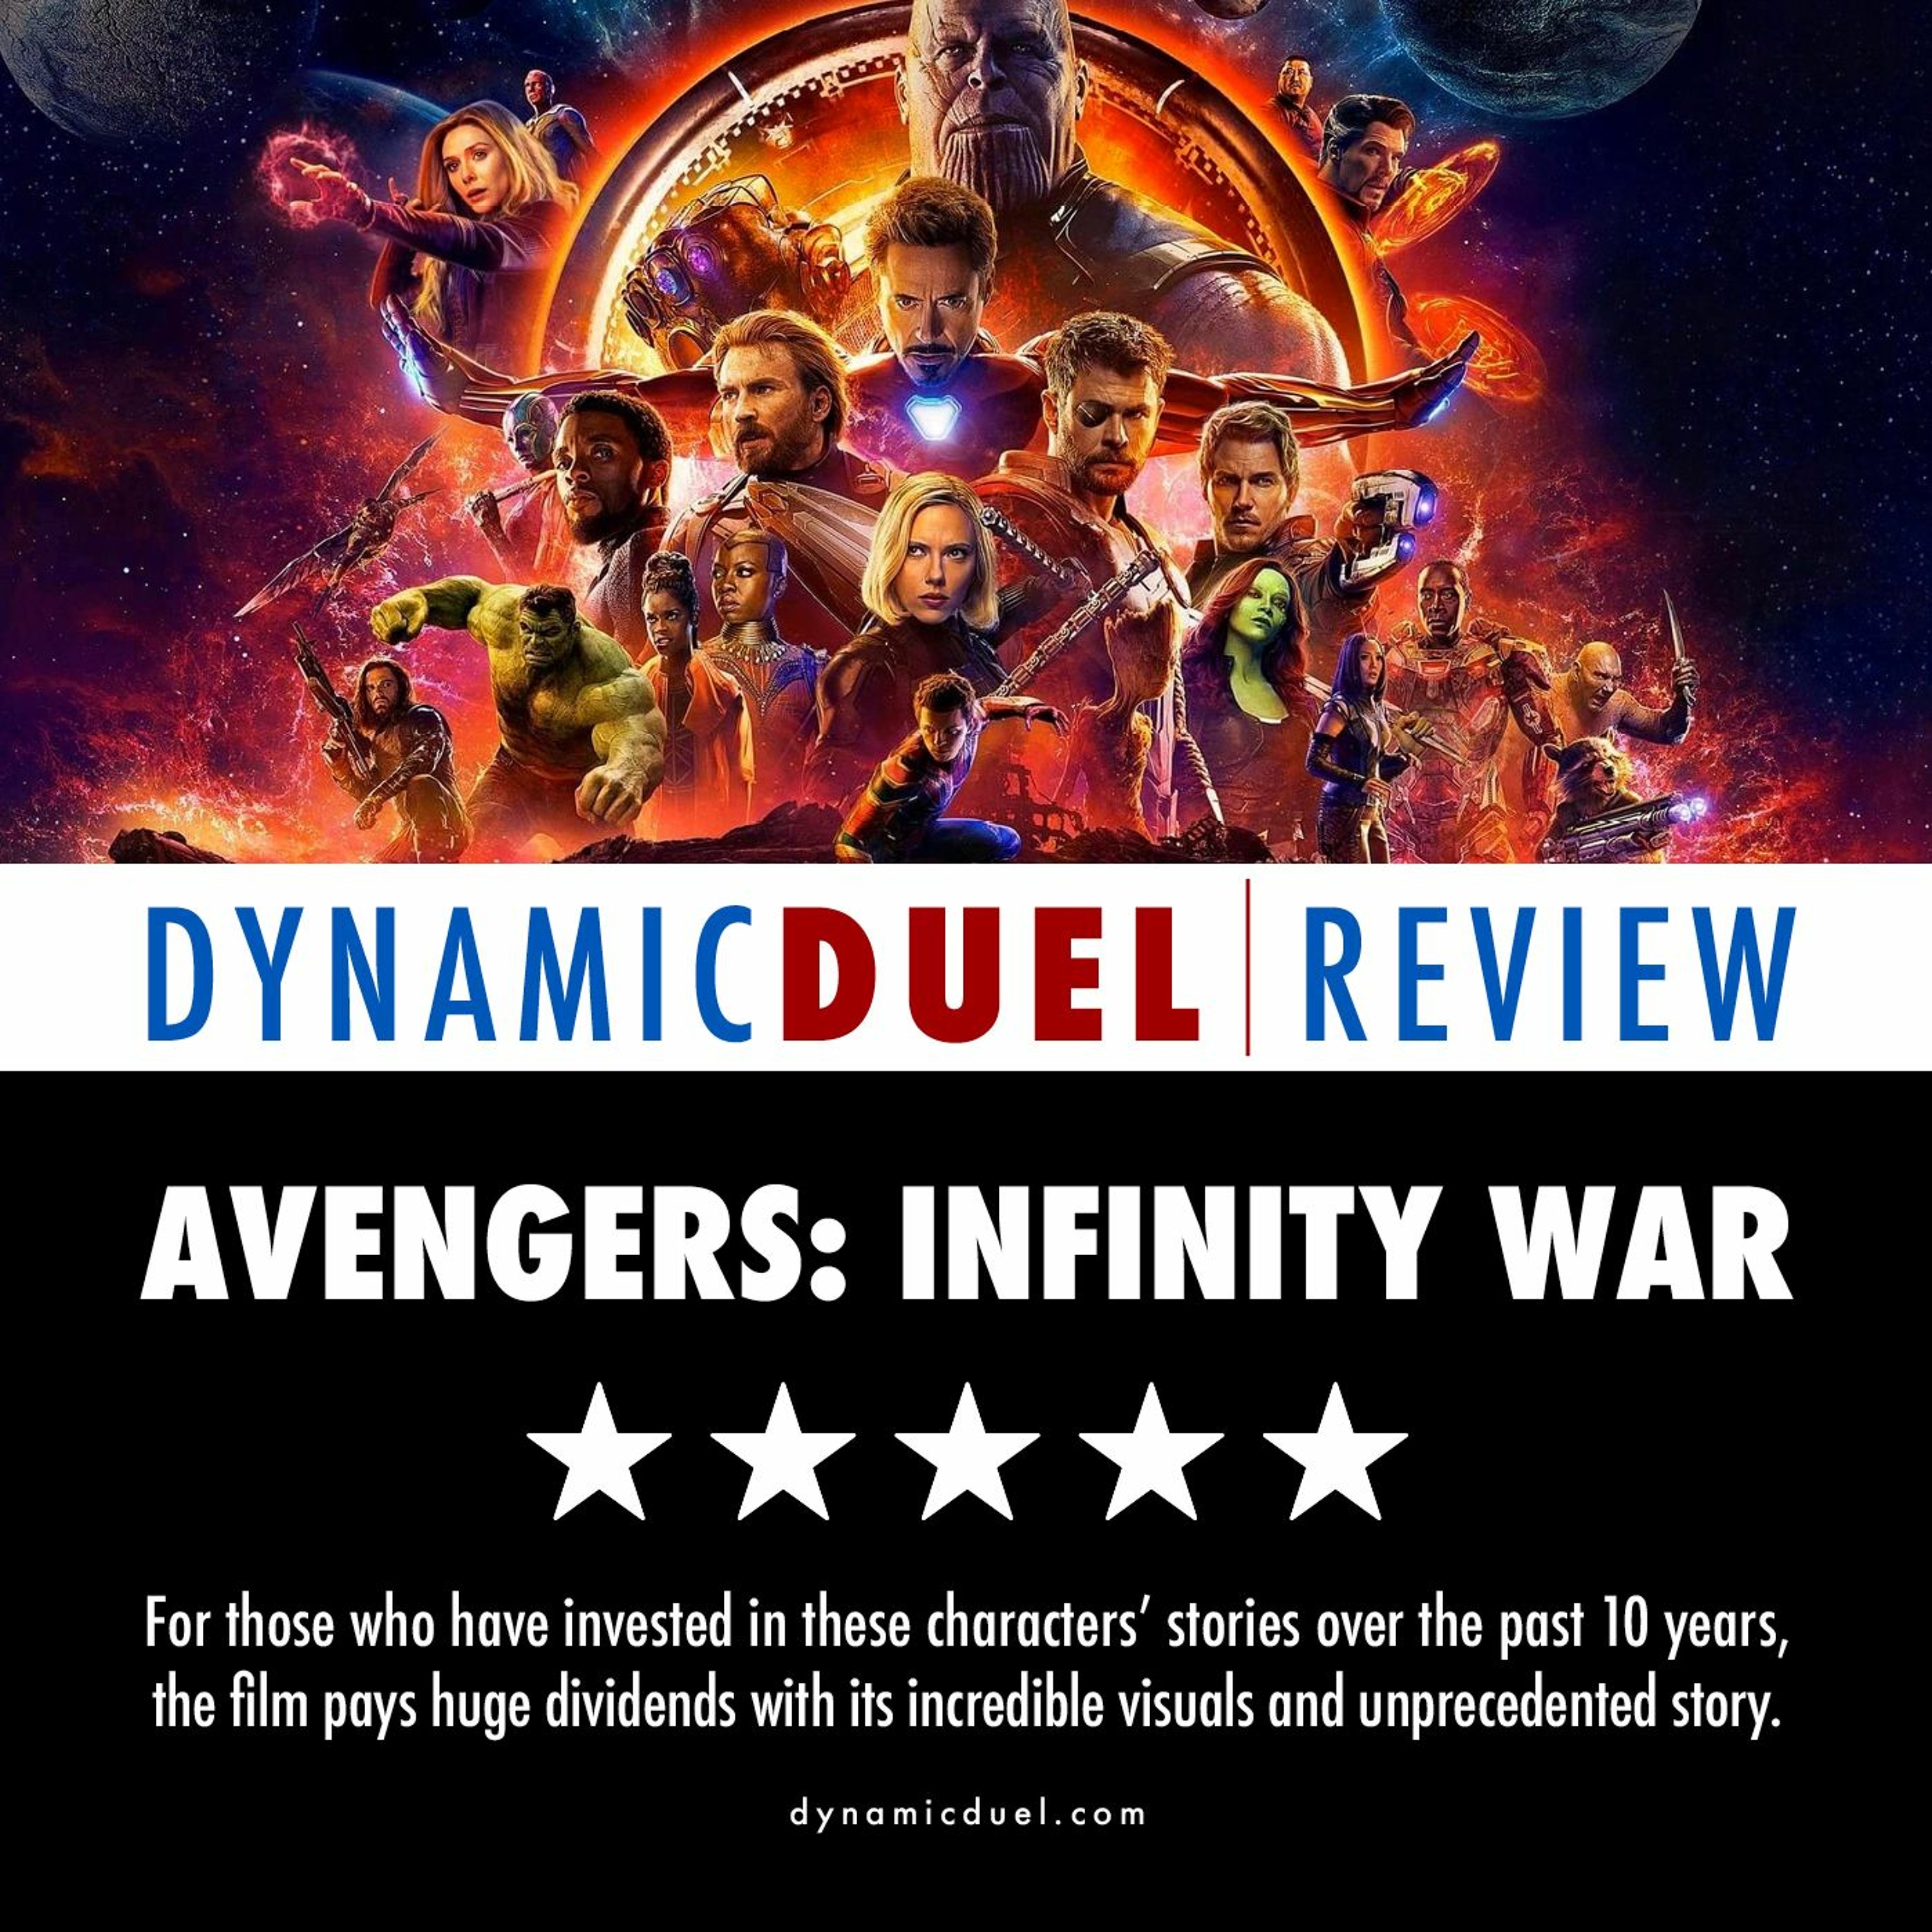 Avengers: Infinity War Review Image